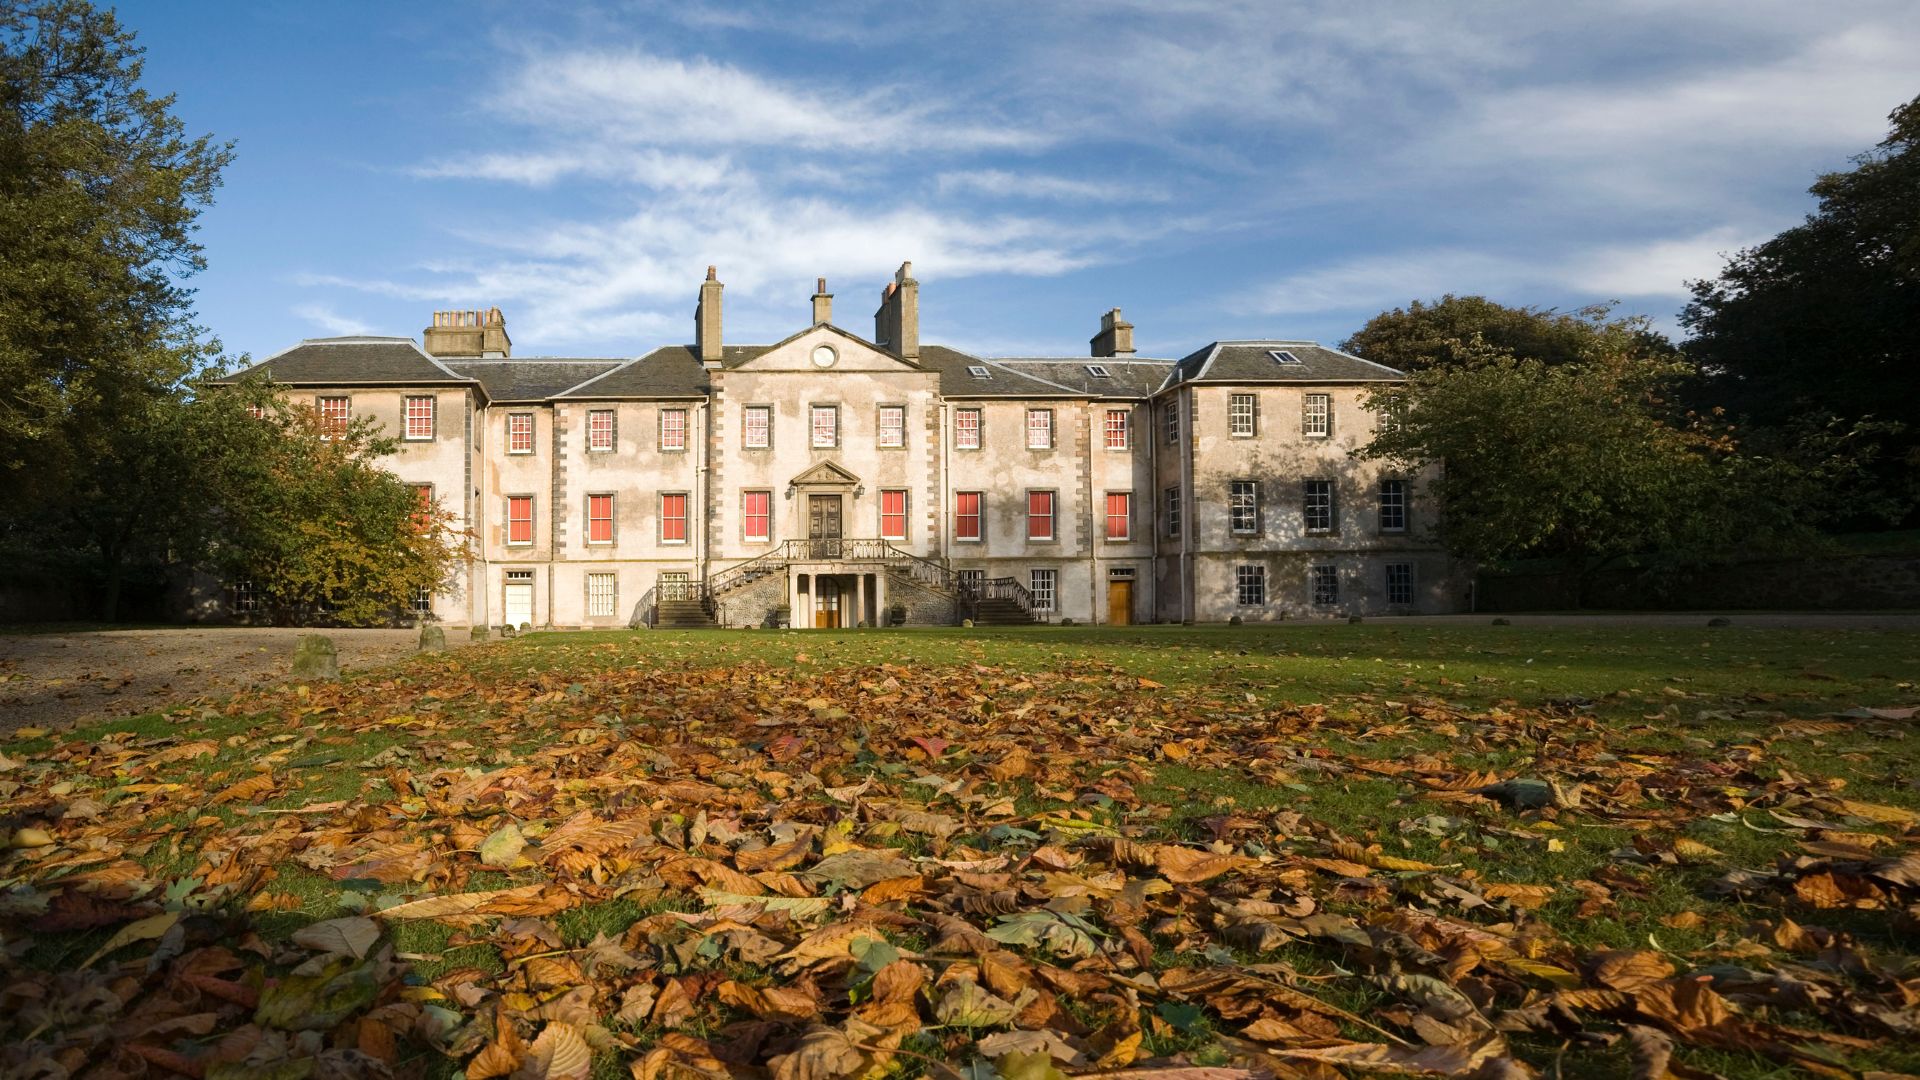 The front of a symmetrical Palladian house with lots of windows and a large grassy area covered in fallen autumn leaves leading up to the front door, perfect for Halloween events.